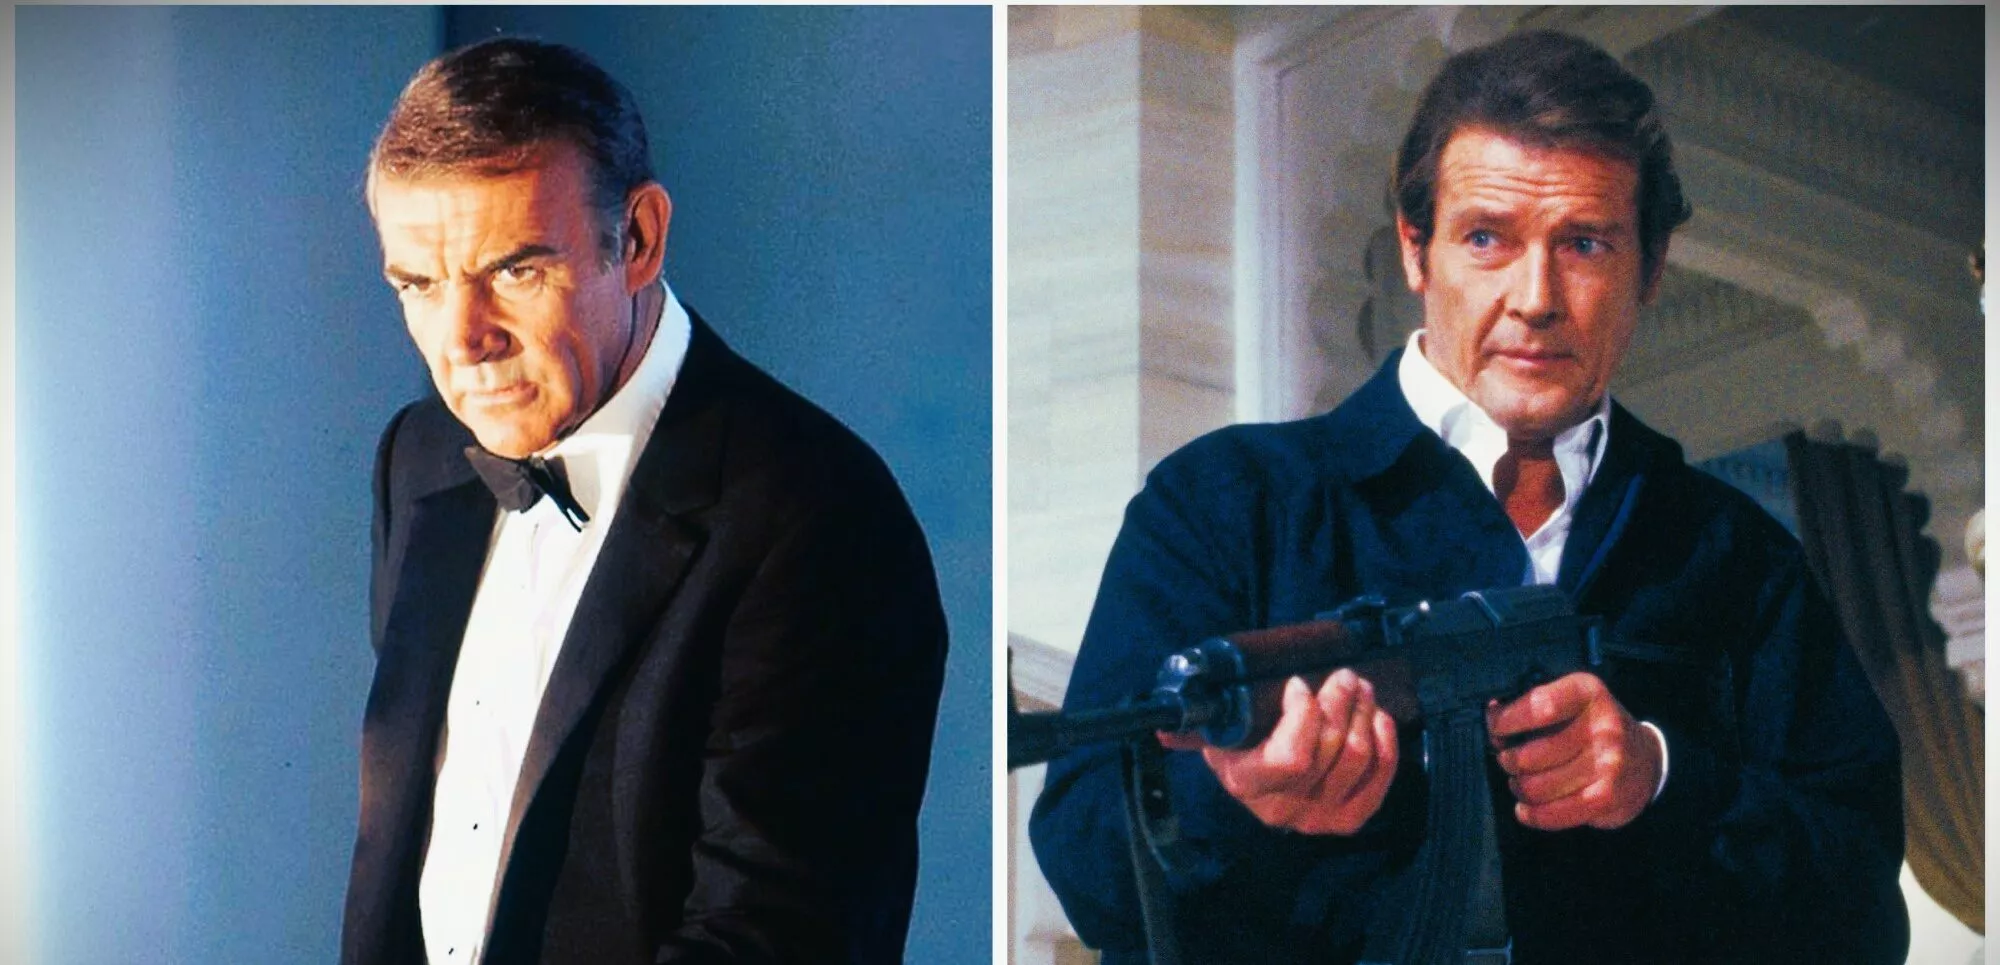 The Battle for James Bond Rights: Octopussy vs. Never Say Never Again